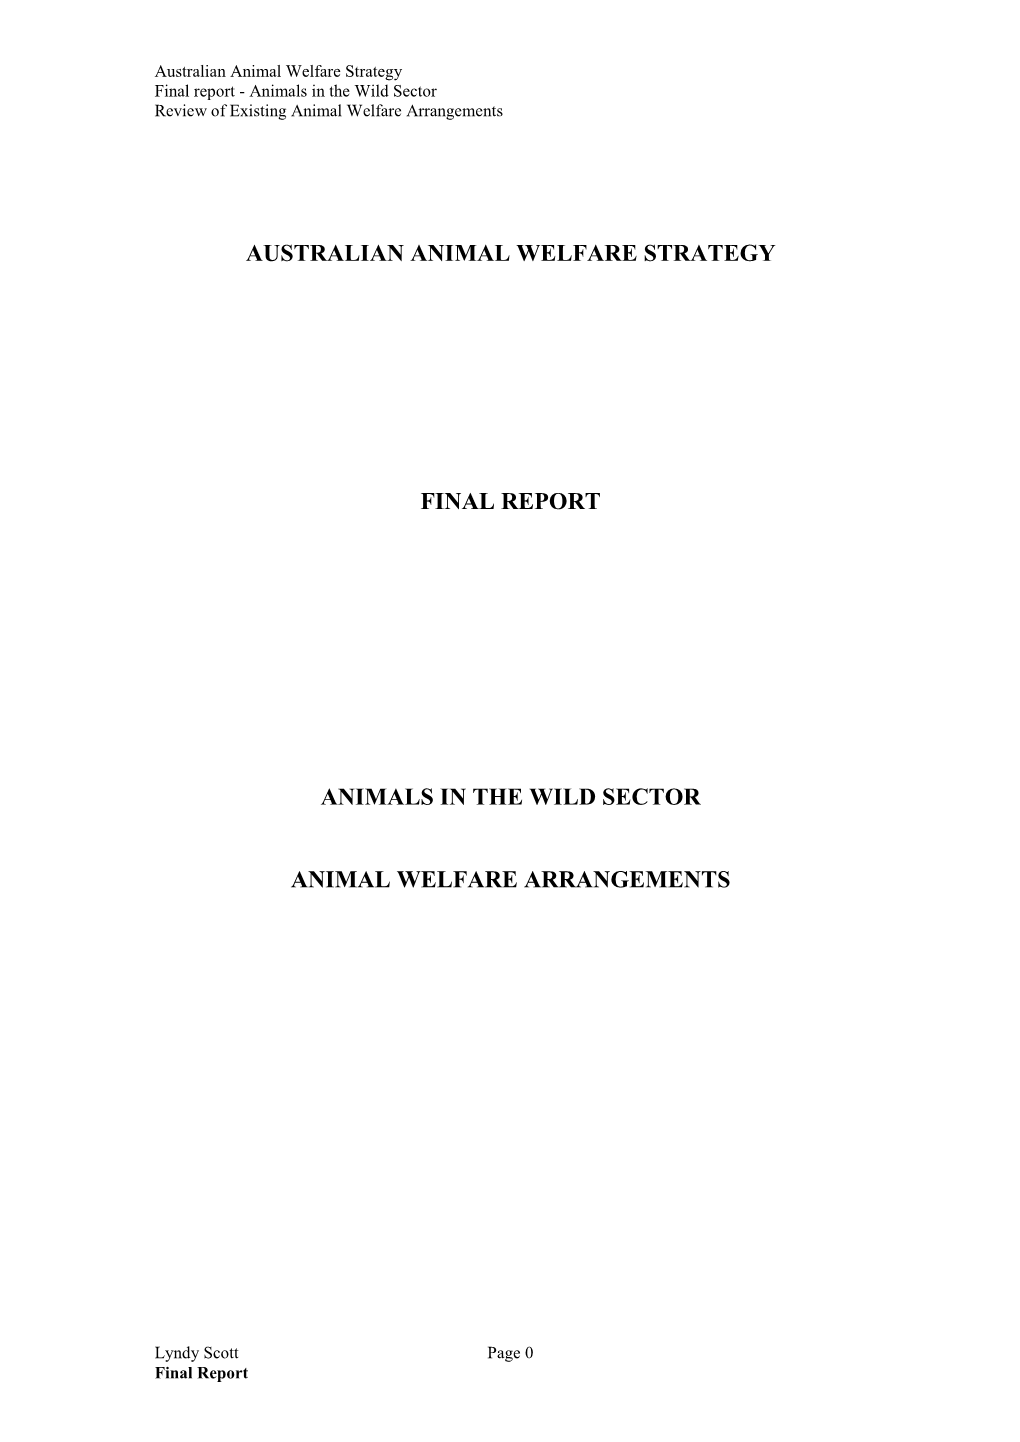 Australian Animal Welfare Strategy Final Report - Animals in the Wild Sector Review of Existing Animal Welfare Arrangements